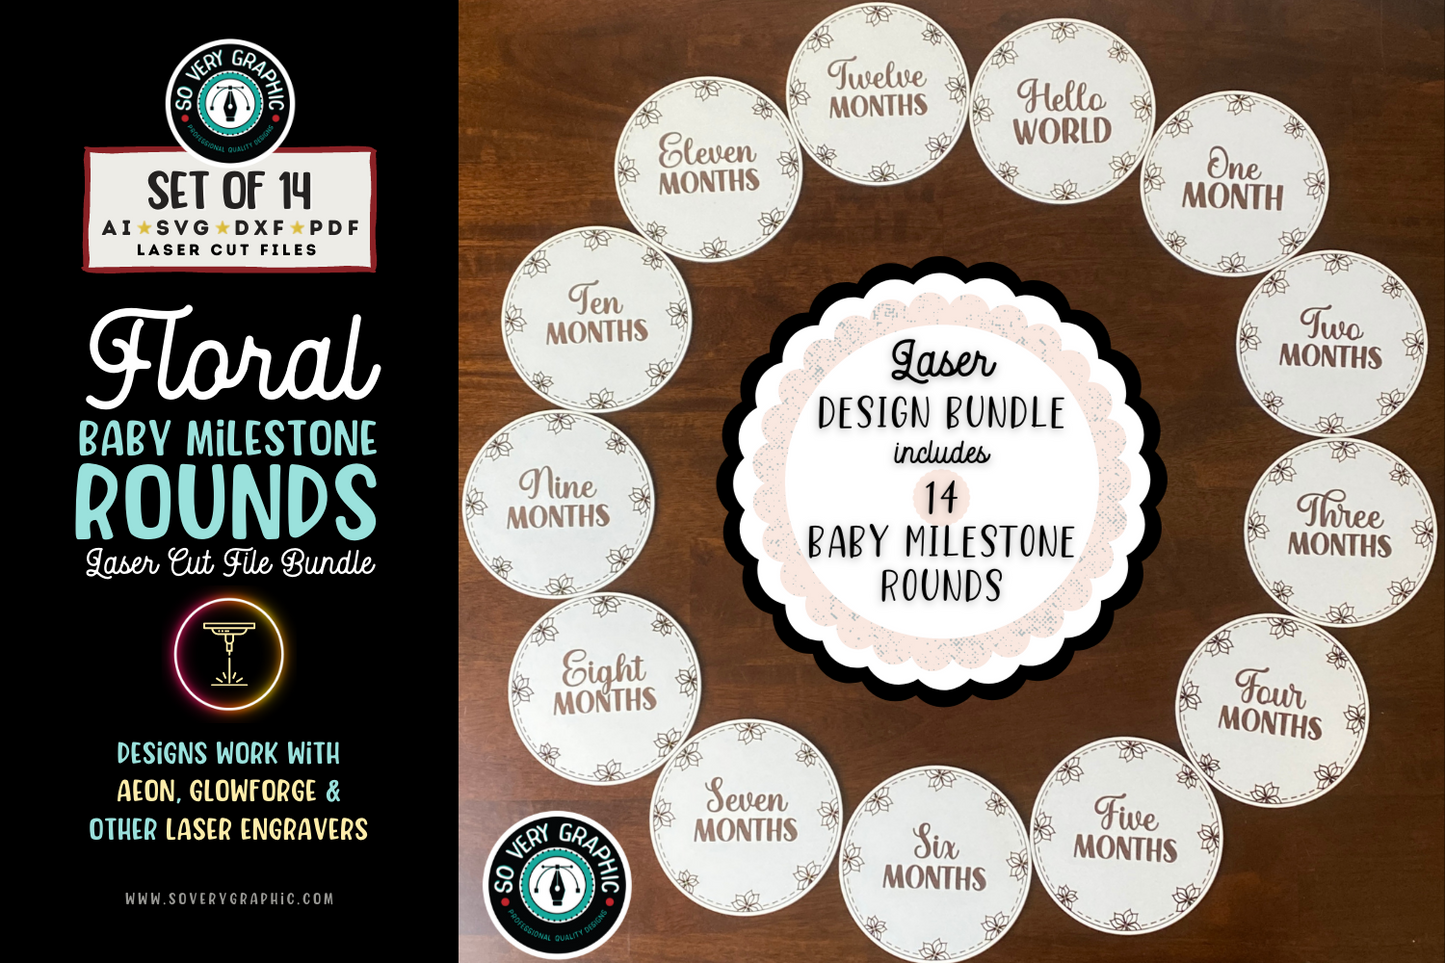 Baby Milestones Floral Rounds Laser Cut File Bundle by So Very Graphic includes 14 laser ready cut files